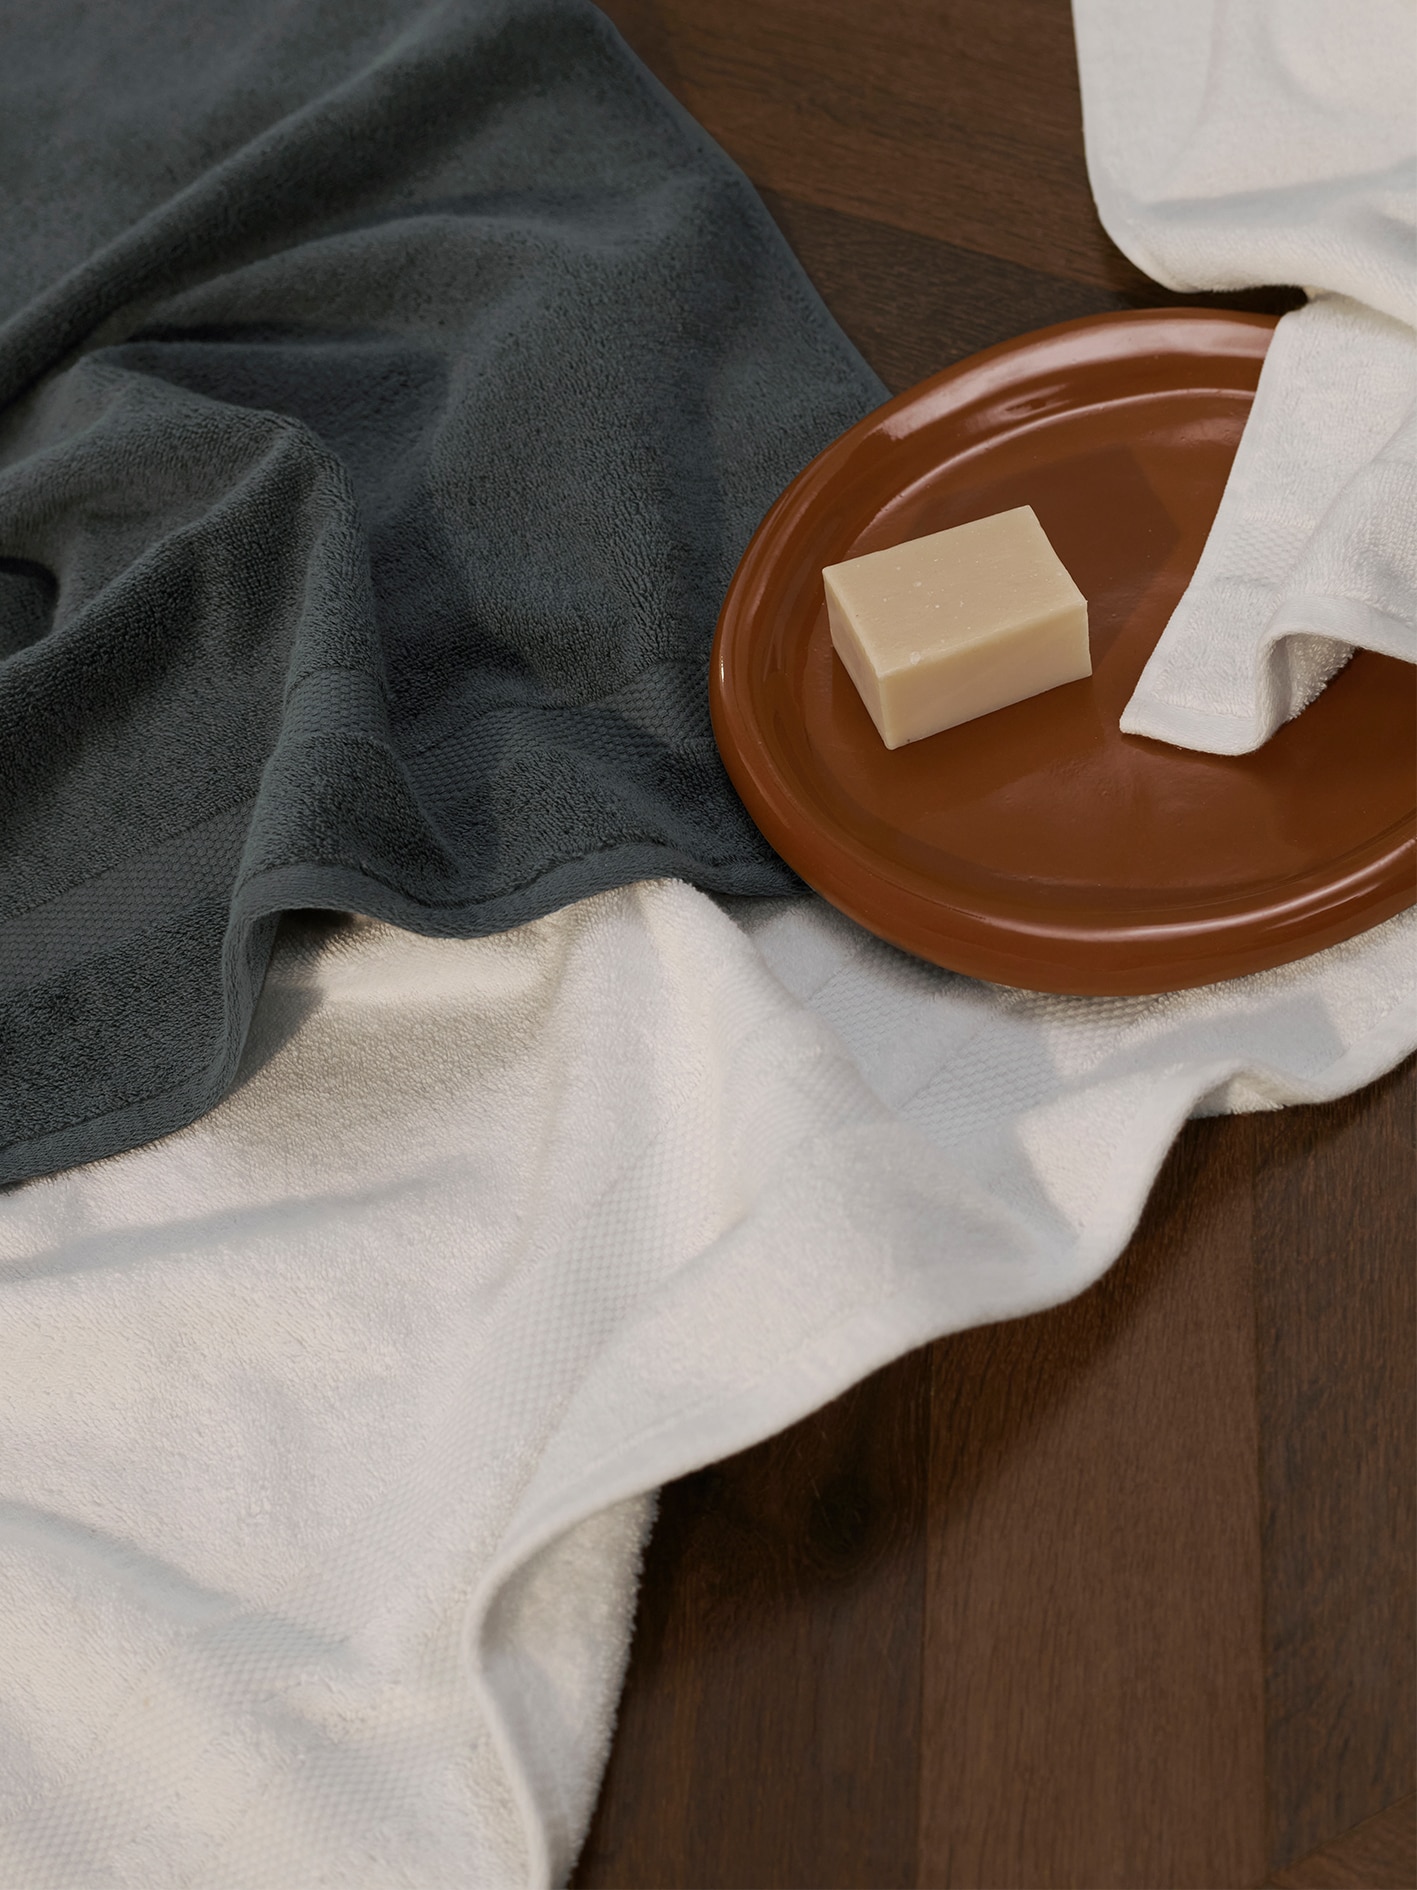 styled towel flat lay. meridian towels in blue and white laid on polished wooden floor. on a brown ceramic plat is a square of soap.